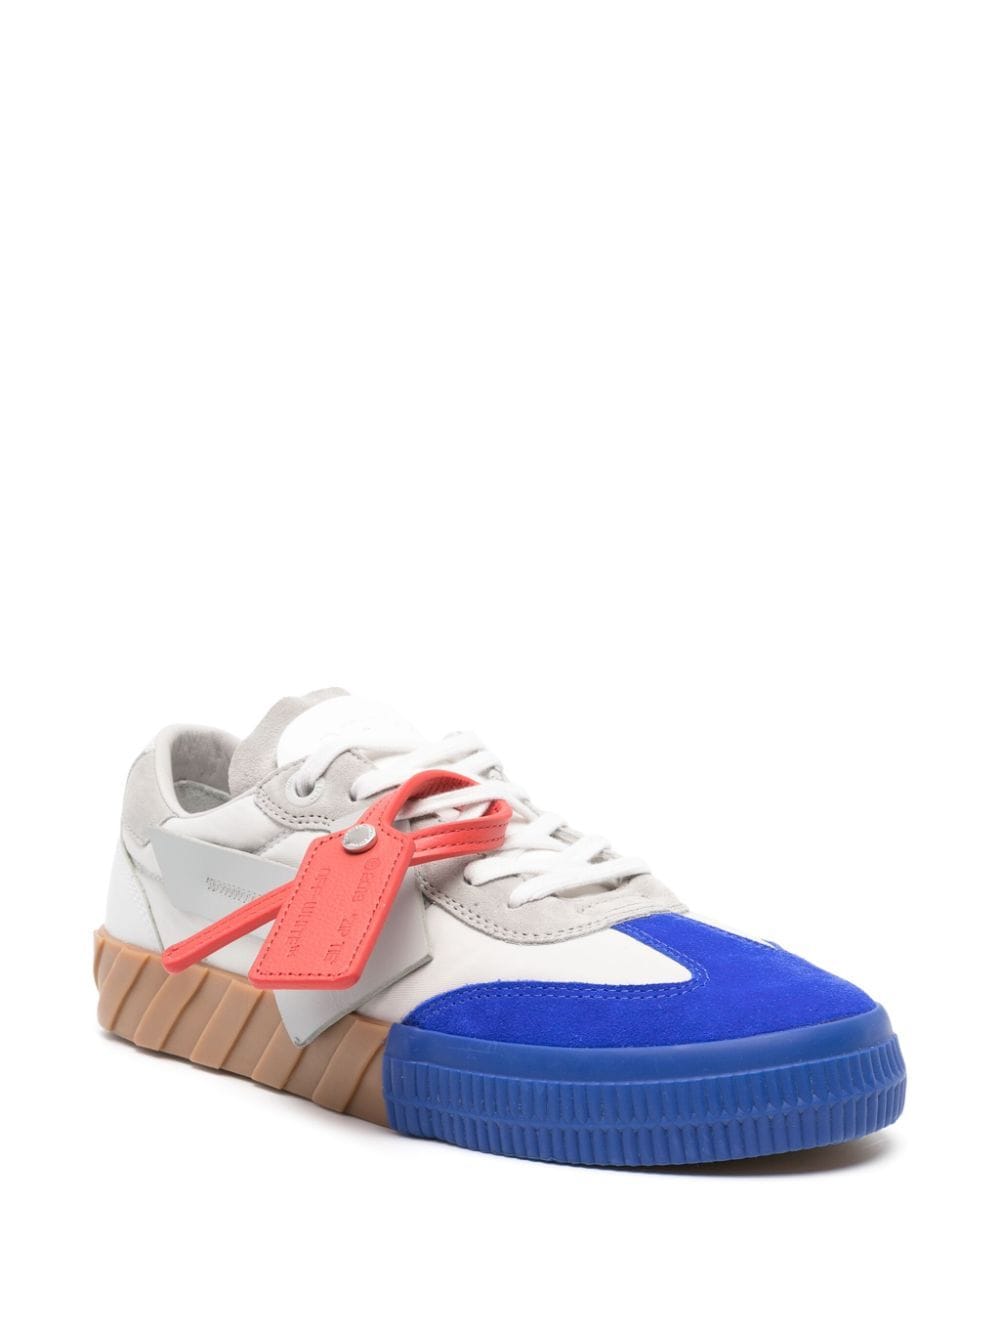 Off-White Floating Arrow Leather Sneakers - Farfetch